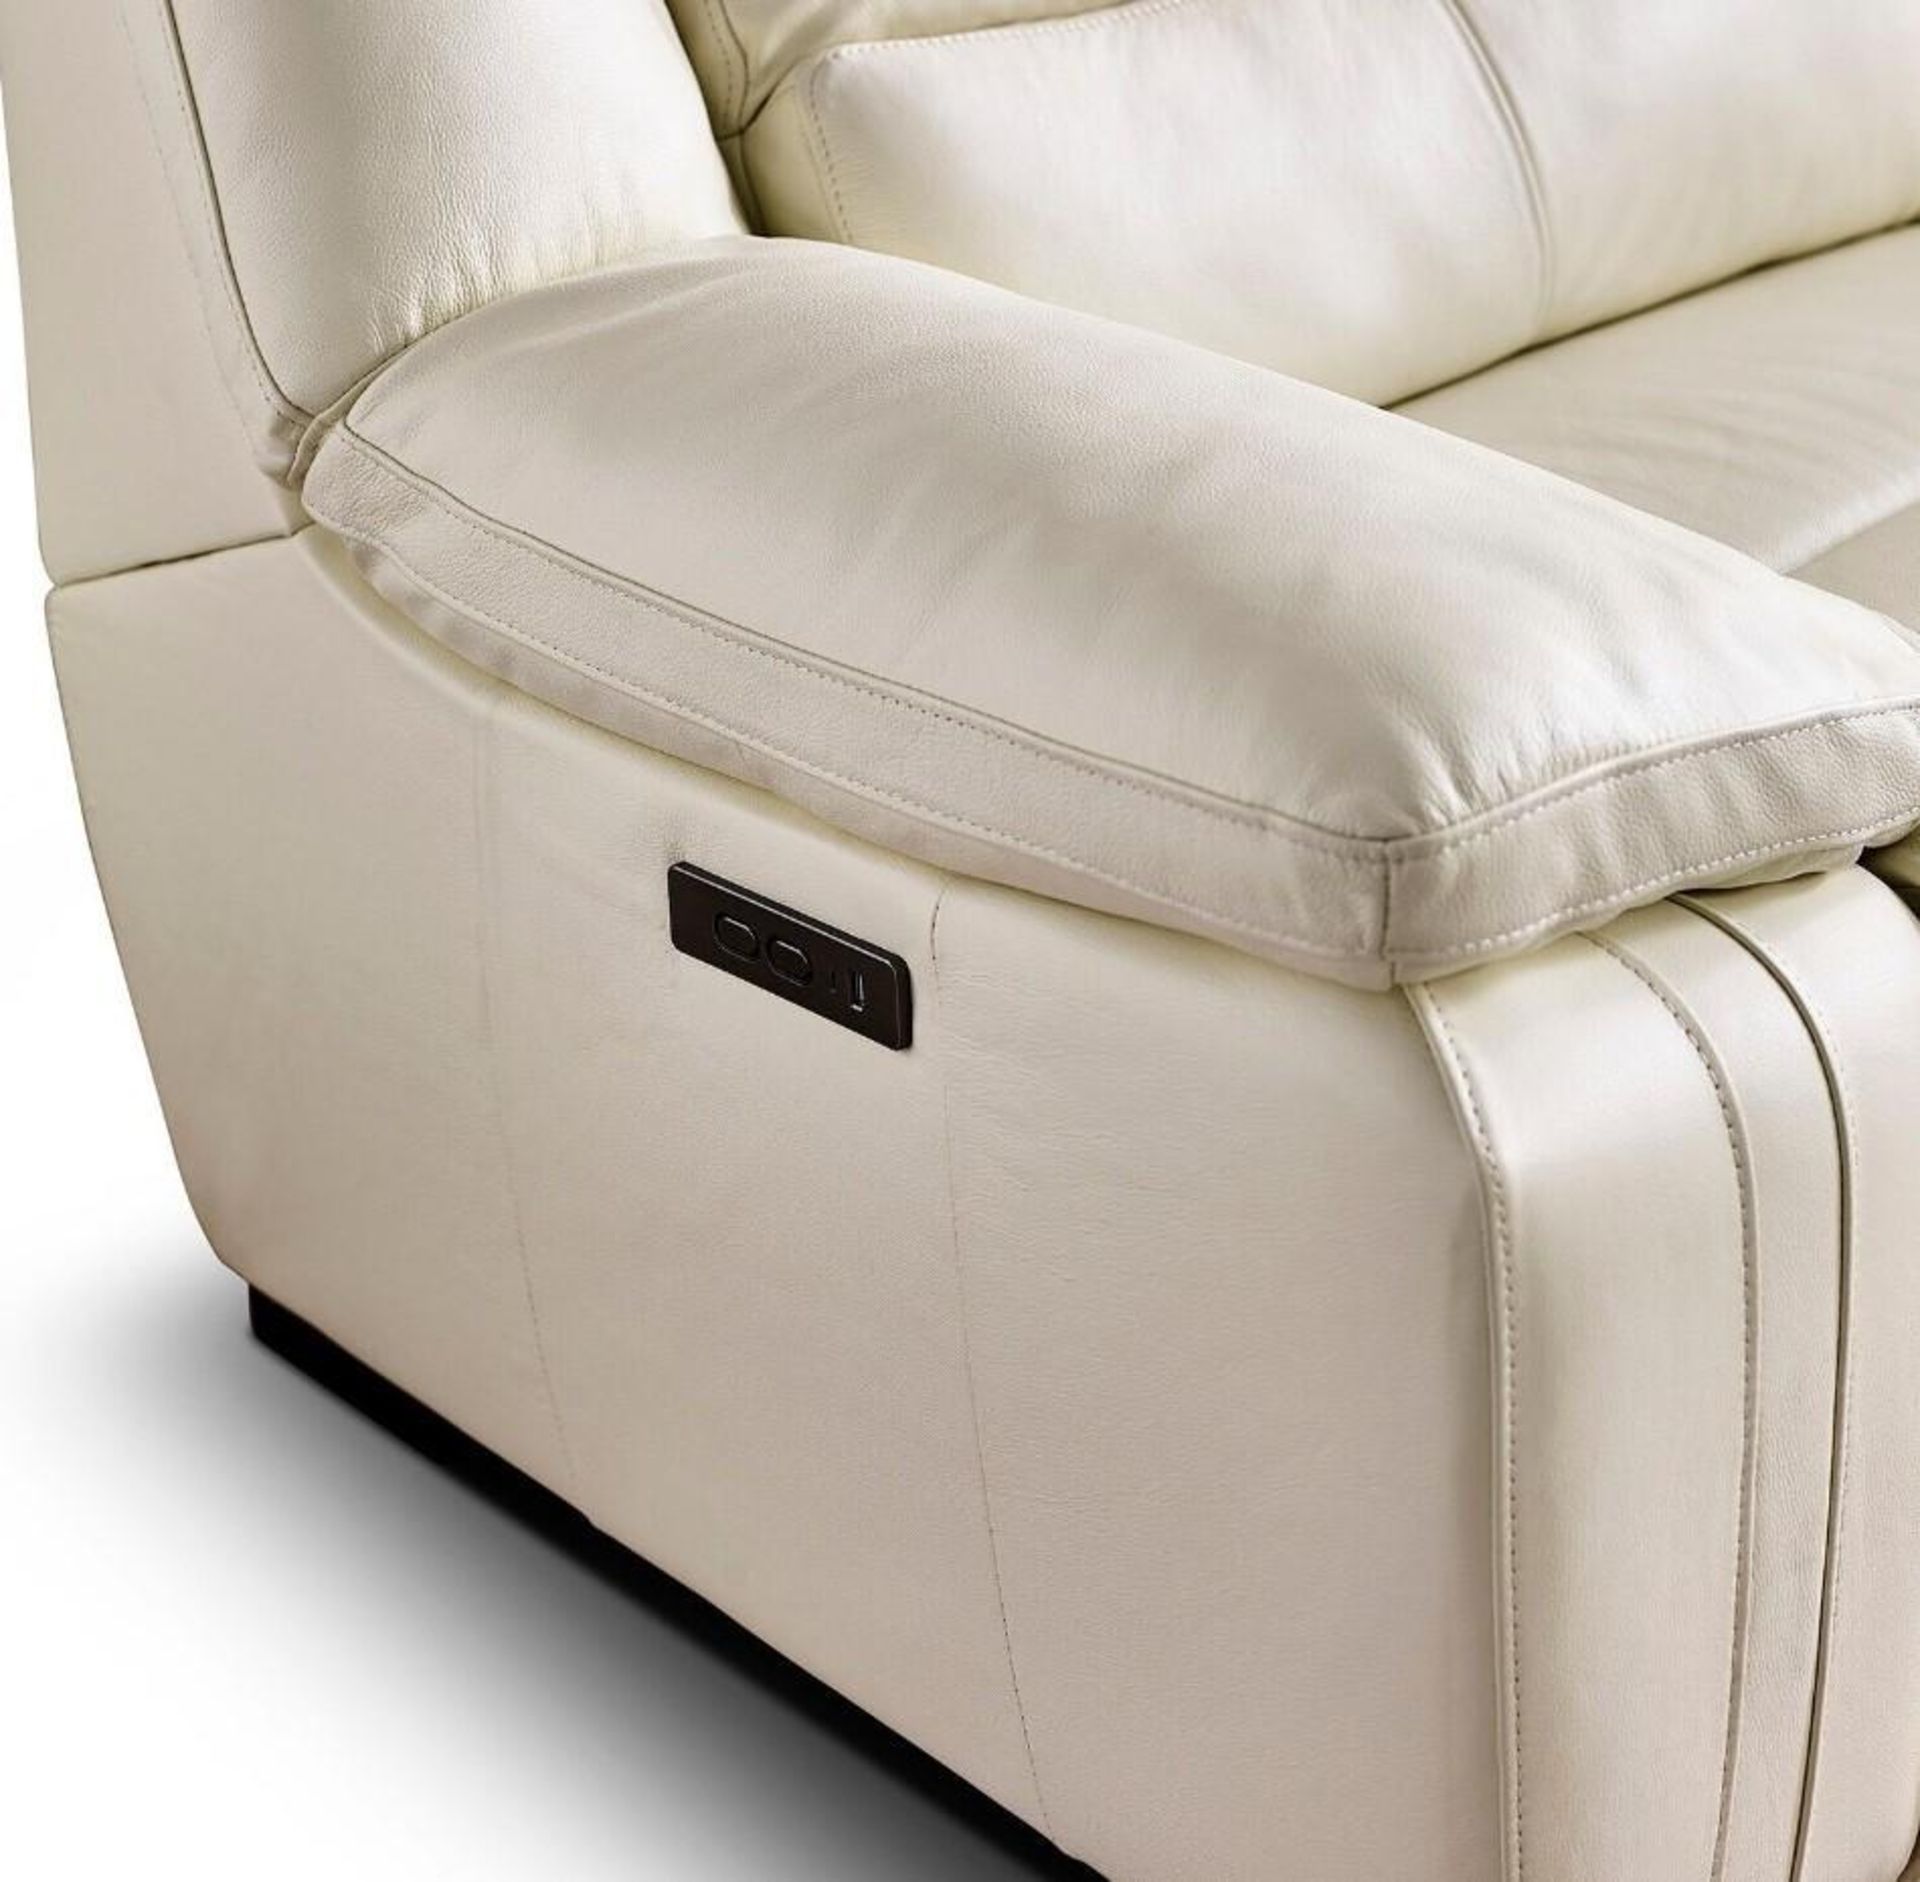 Brand new and boxed SCS Fallon 3 seater electric reclining sofa in Cream. - Image 4 of 7